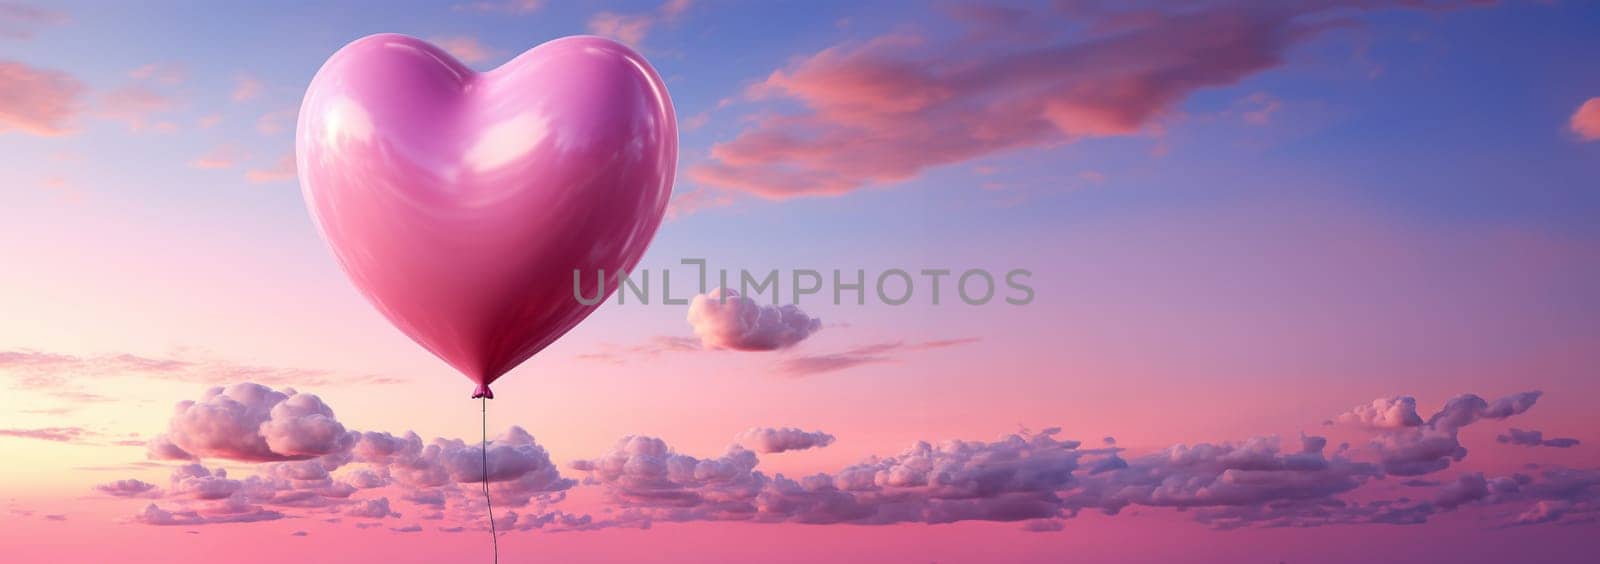 Pink balloon heart shape against colorful blue sunset sky and pink pastel sky in a sunny bright morning. Romantic postcard background on Valentine's Day. Travel and recreation theme Copy space by Annebel146